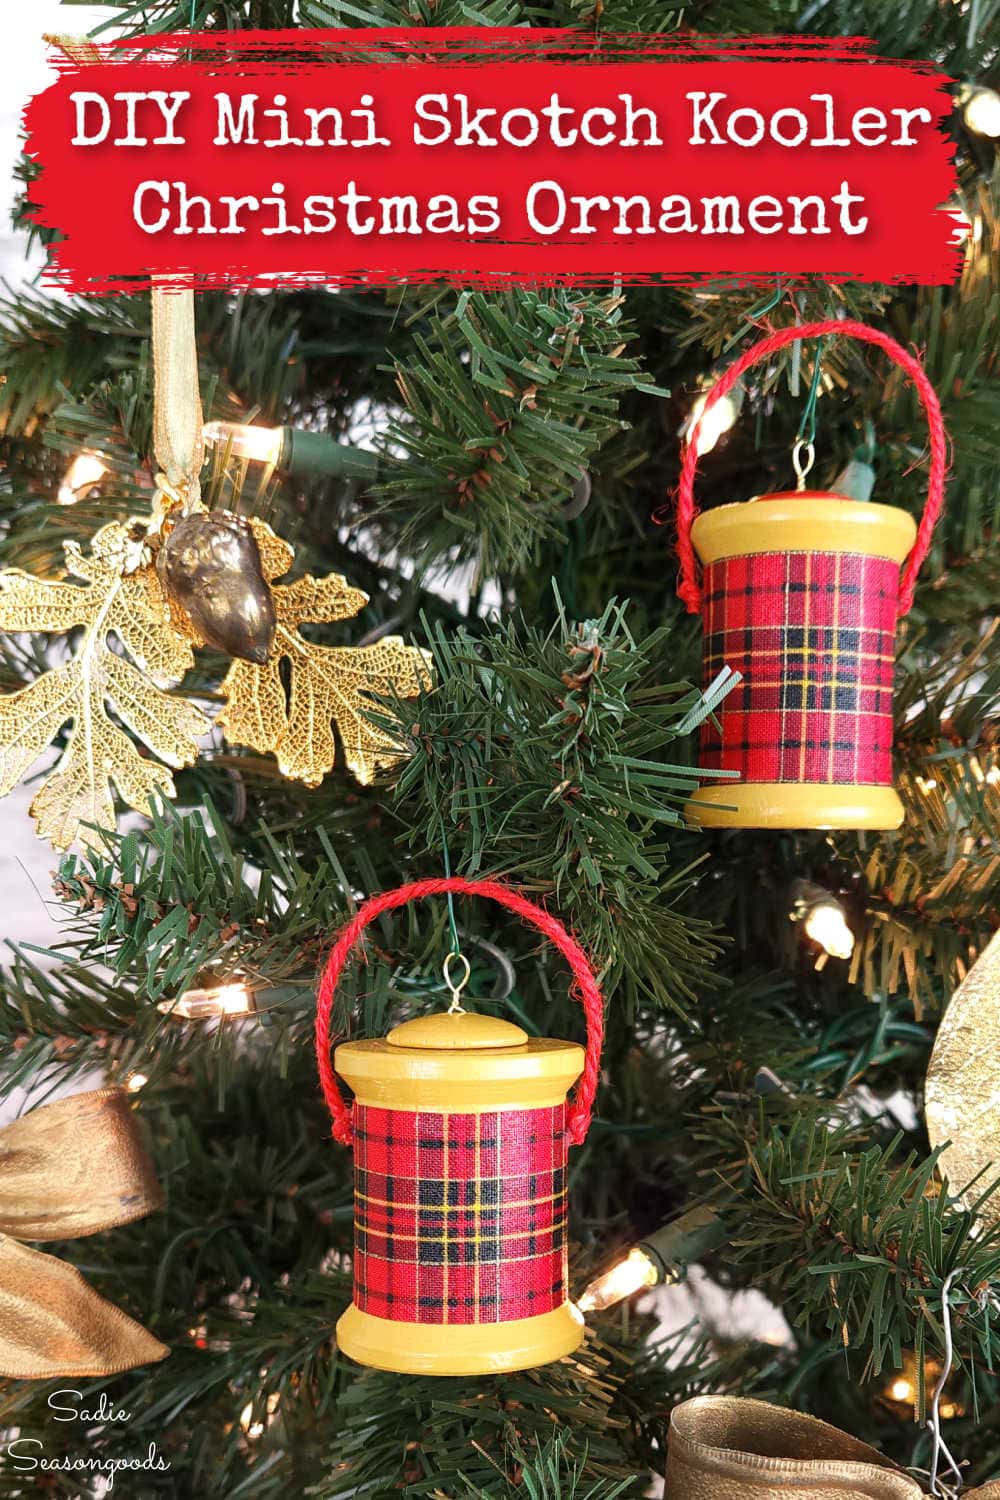 how to make a mini skotch kooler ornament from a wooden spool